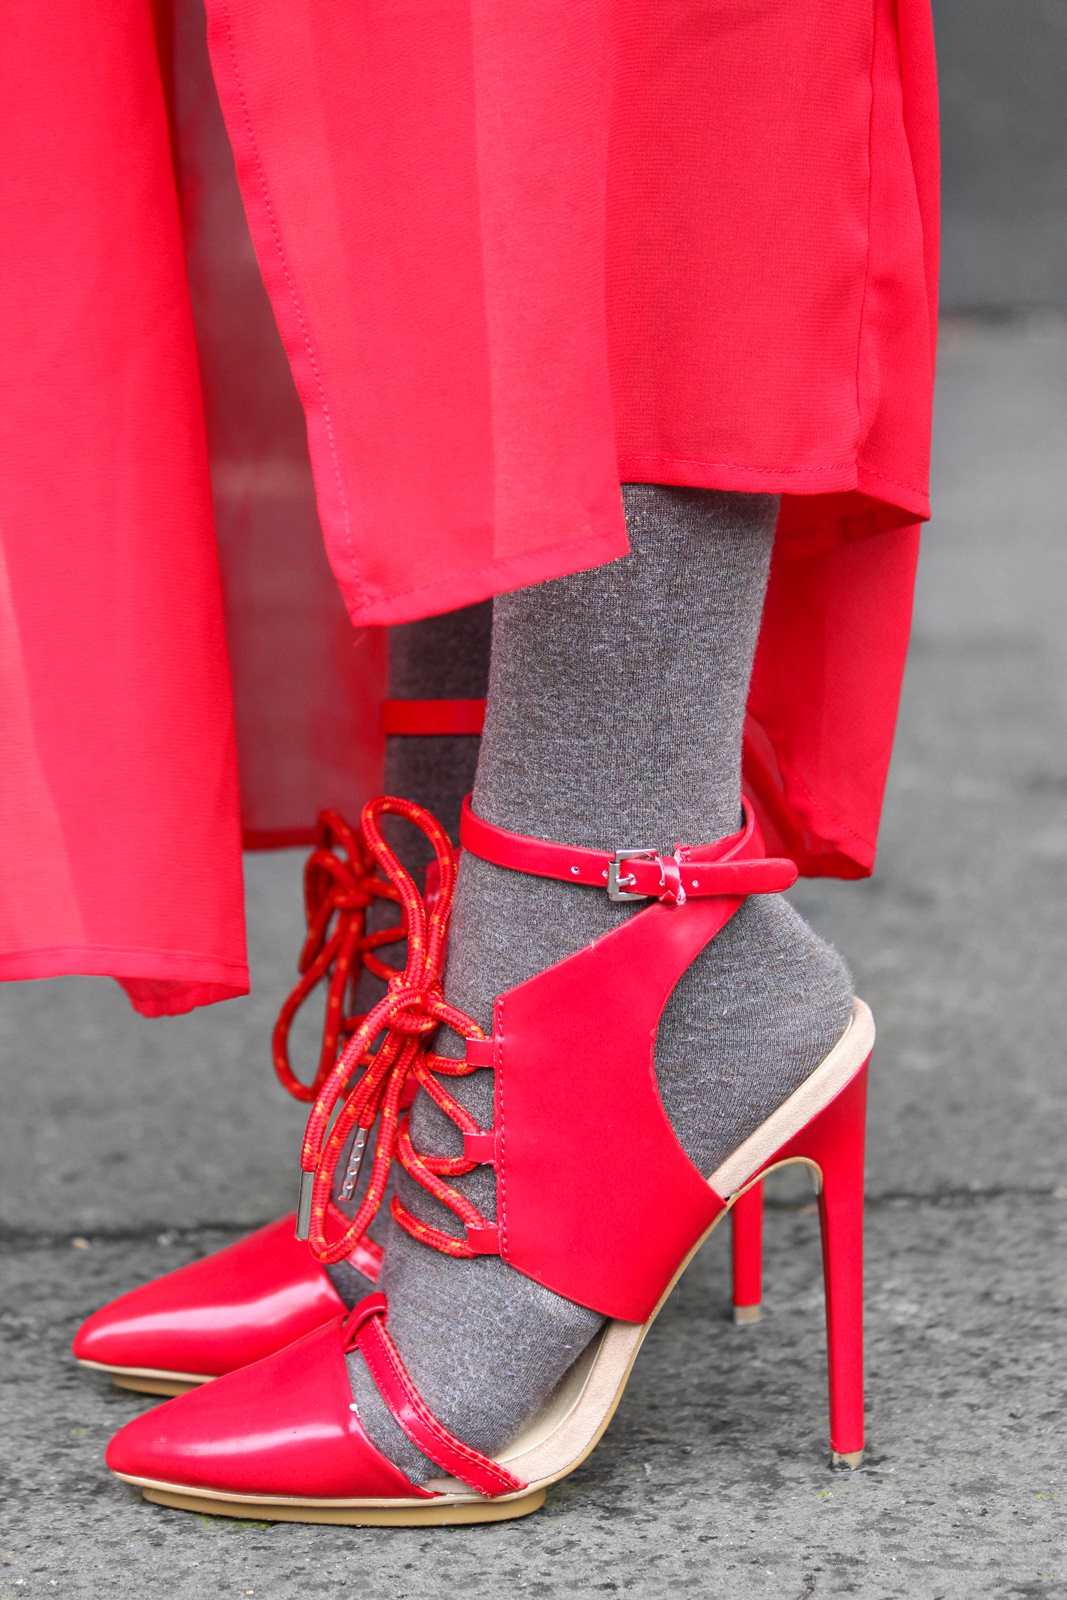 Streetstyle aroung the world Milano - Red dress, JustFab Heels, hat 6